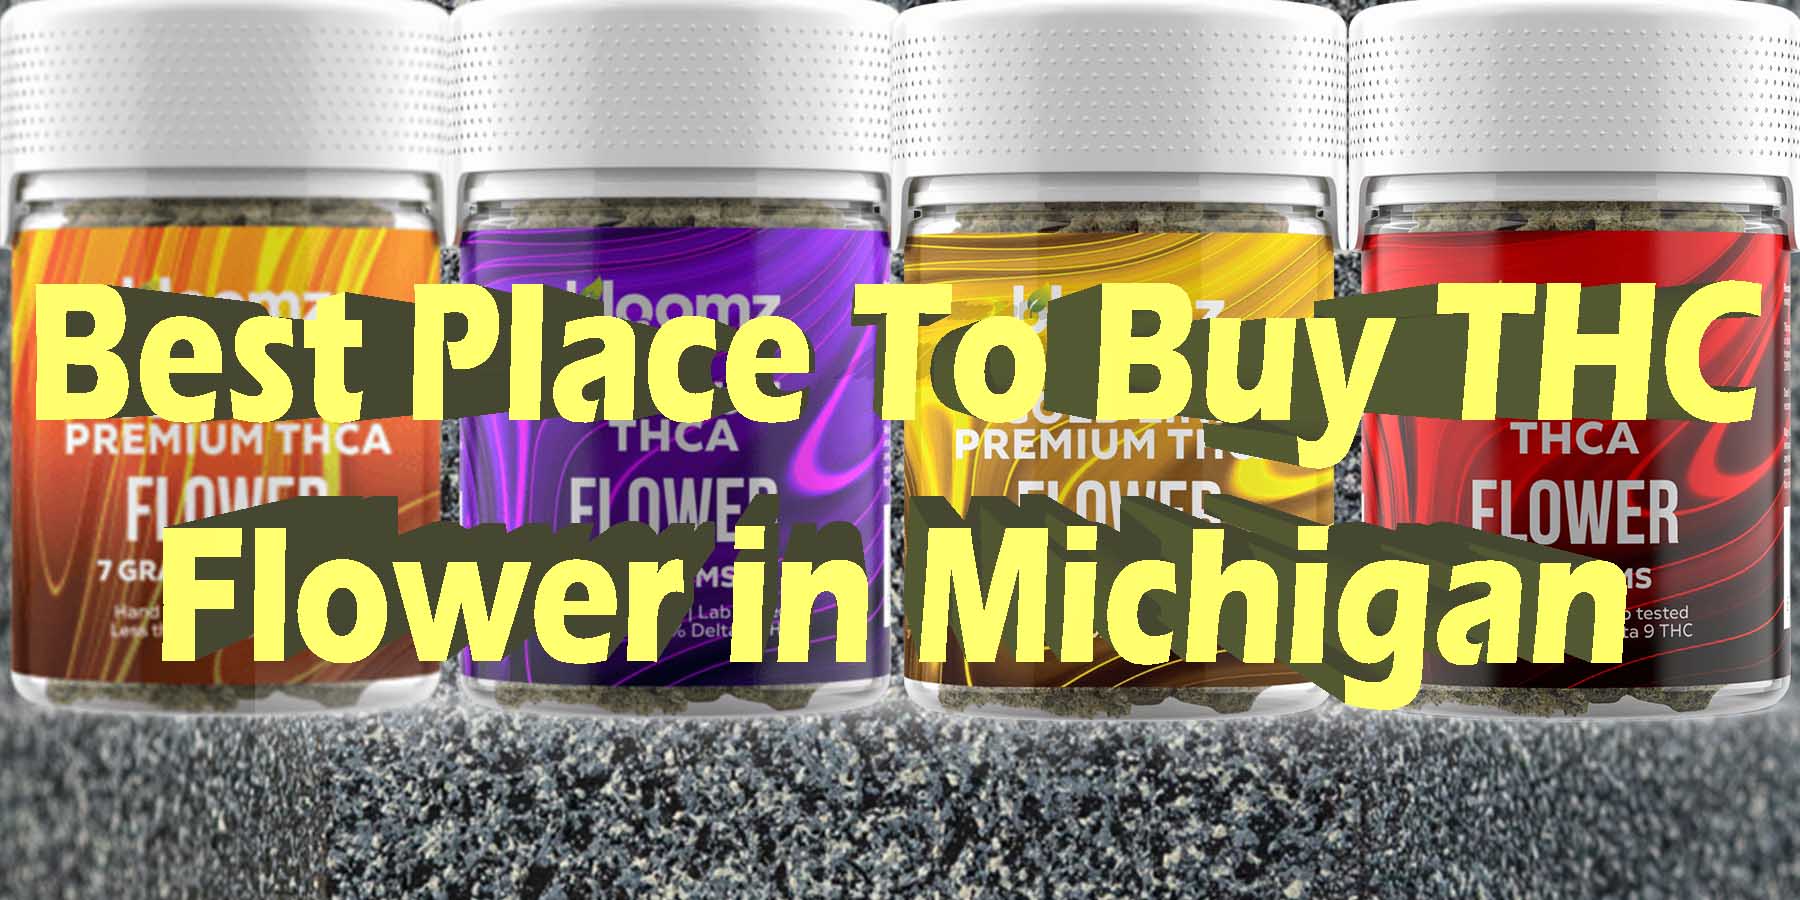 Best Place to Buy THC Flower in Michigan BestPlace LowestPrice Coupon Discount For Smoking Best High Smoke Shop Online Near Me StrongestBrand Binoid